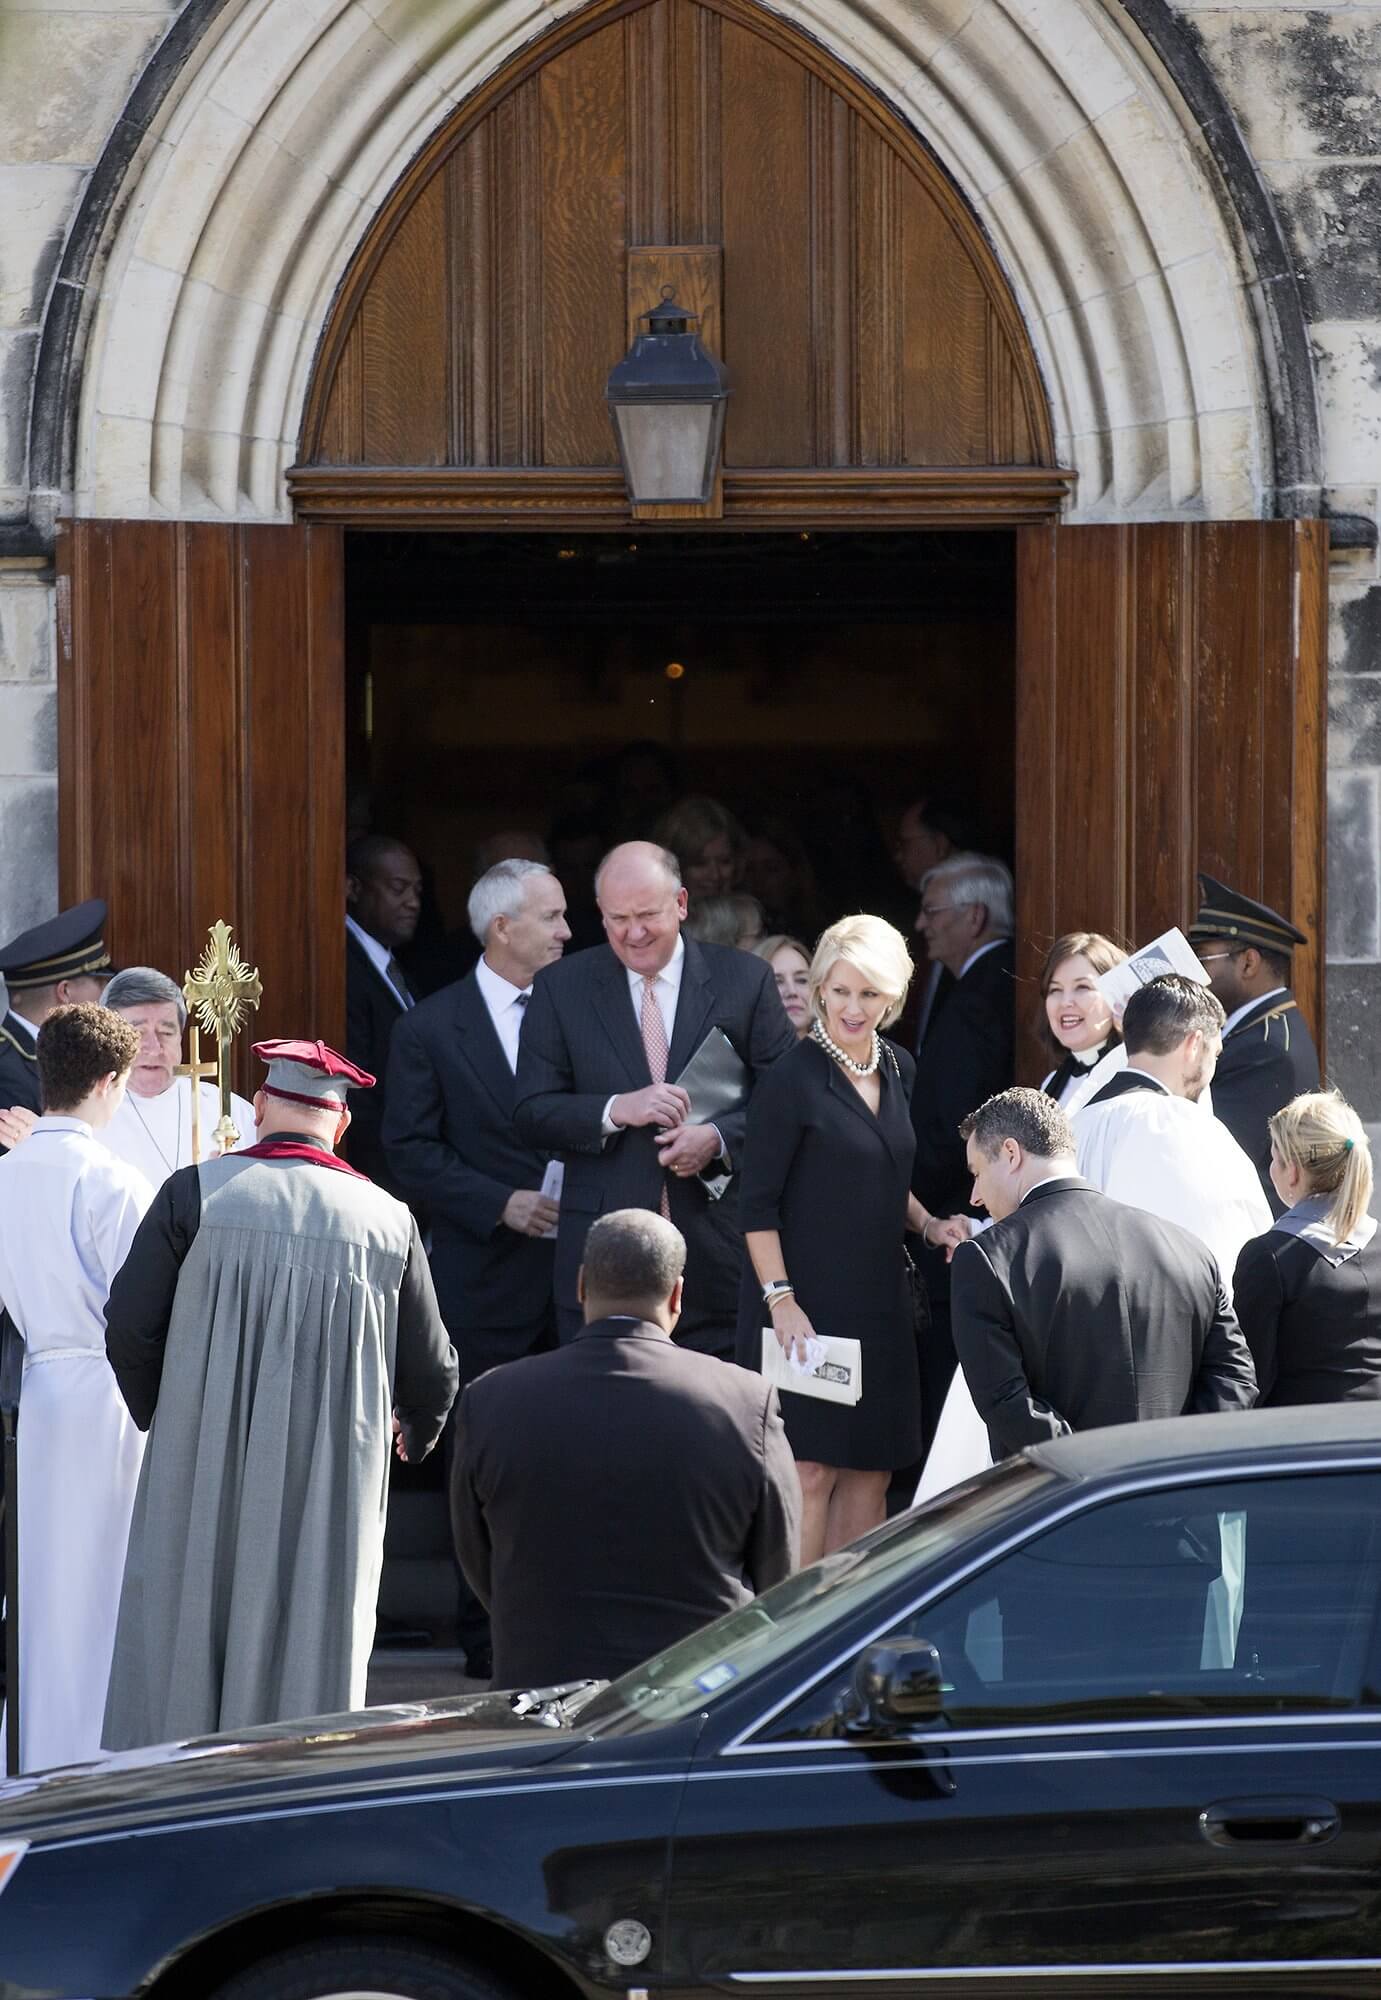 Charles “Chuck” Fraser, M.D., and wife Helen Cooley Fraser, son-in-law and daughter of Dr. Cooley, respectively, leave Trinity Episcopal Church after the memorial service on Nov. 28, 2016. (Photo: Cody Duty)